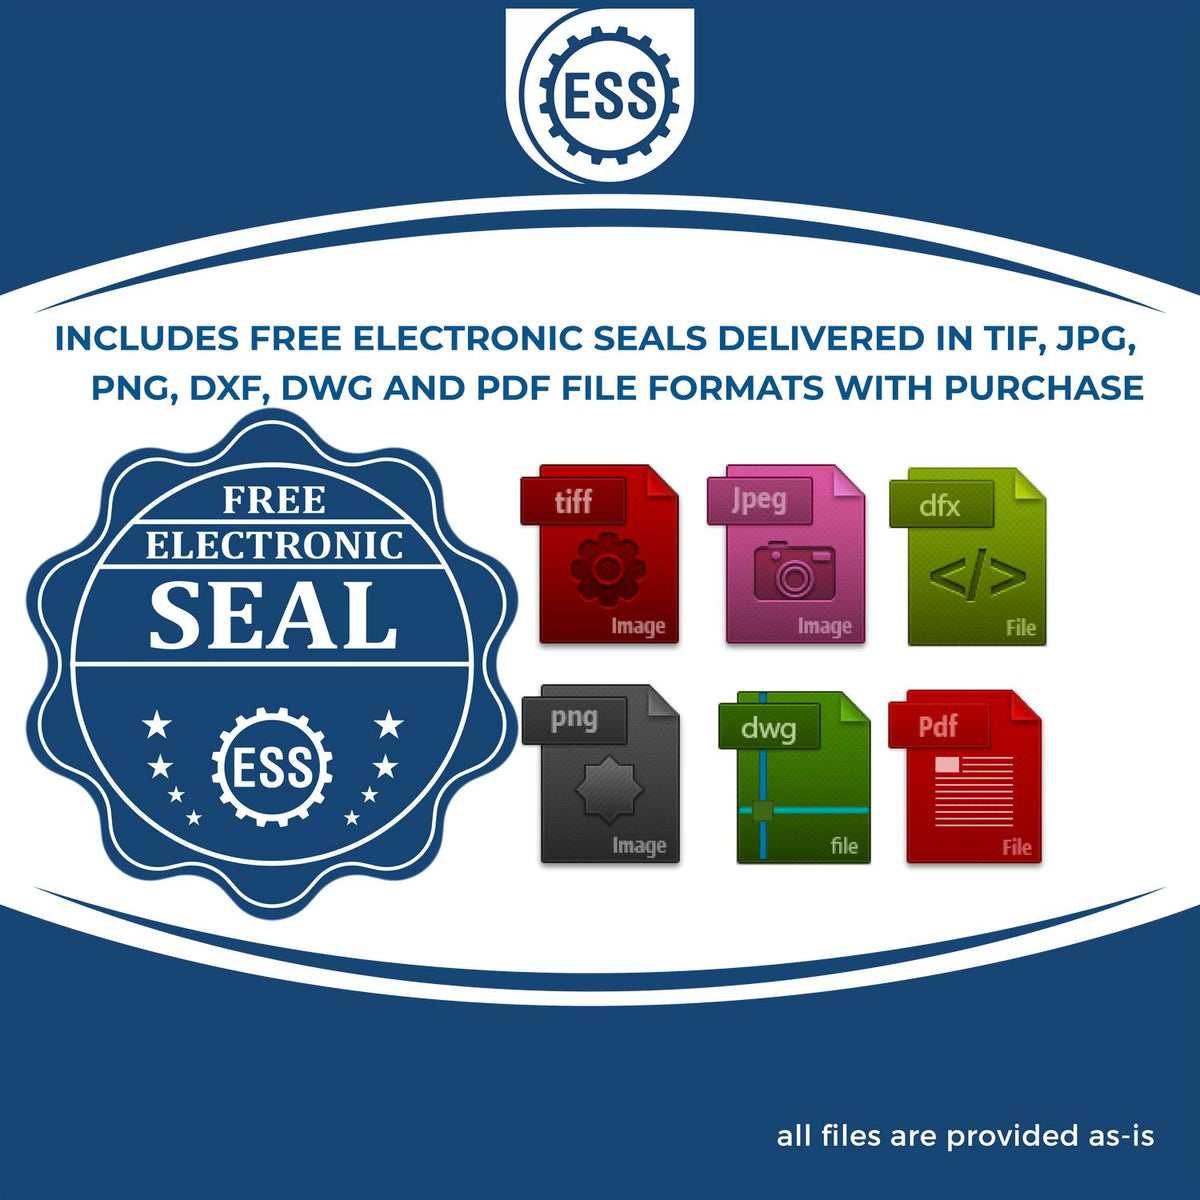 An infographic for the free electronic seal for the Gift Missouri Landscape Architect Seal illustrating the different file type icons such as DXF, DWG, TIF, JPG and PNG.